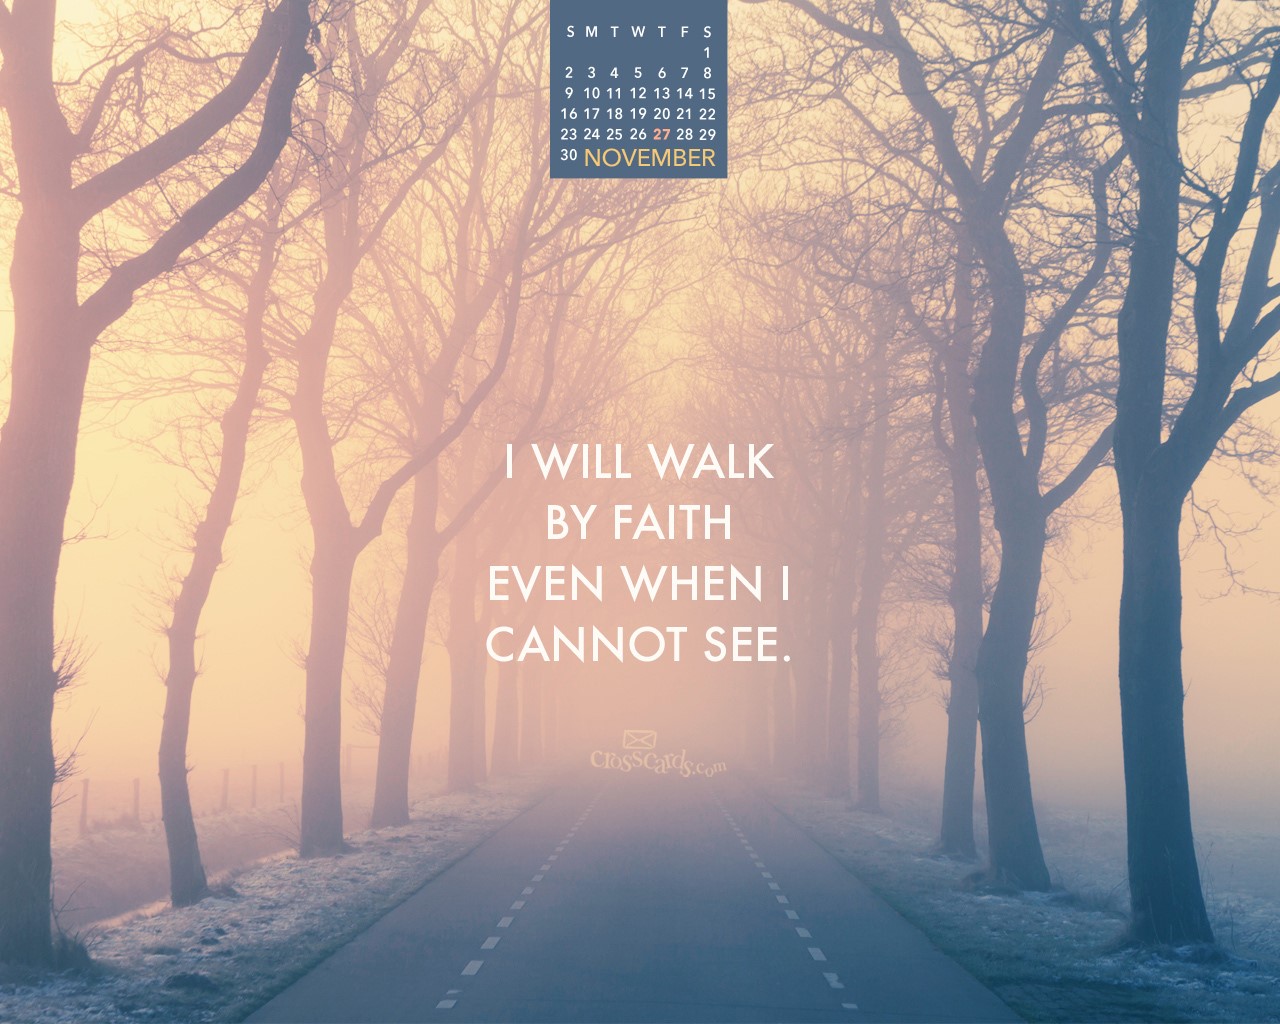 Crosscards Wallpaper By Jarmil Livard, Freshwallpaperszone - Walk By Faith Even When I Cannot See - HD Wallpaper 